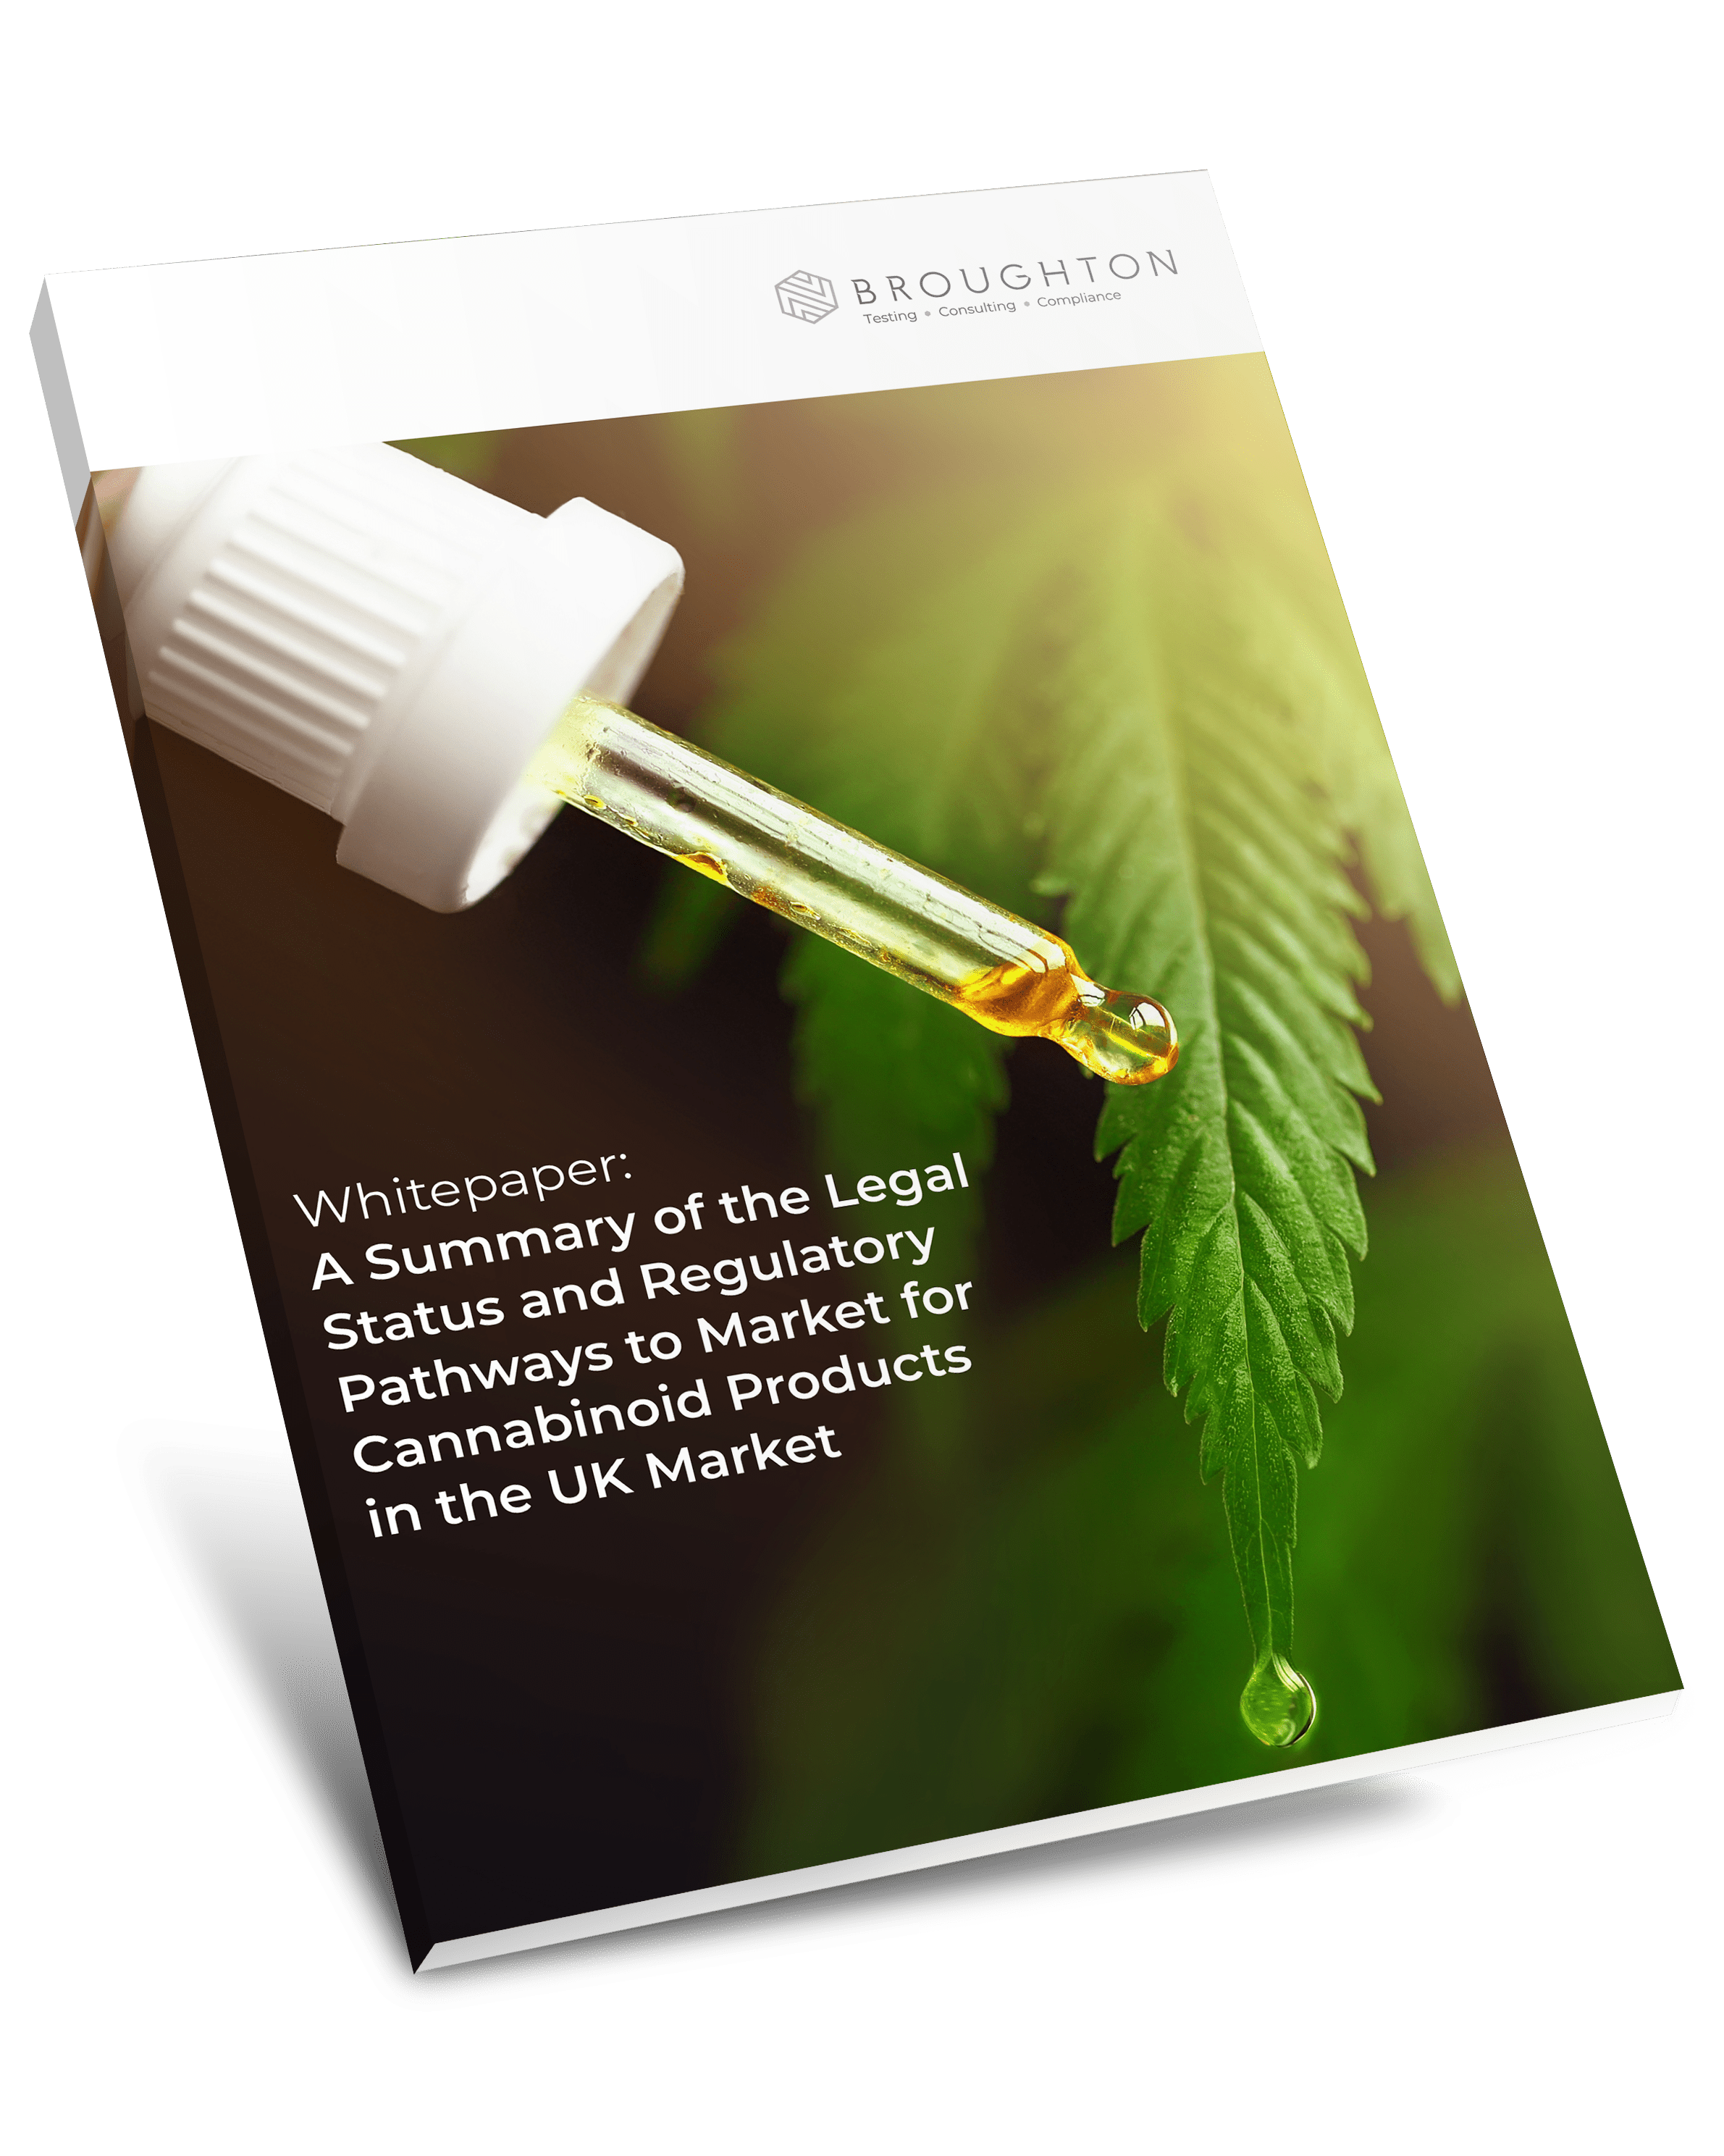 Whitepaper:-A-Summary-of-the-Legal-Status-and-Regulatory-Pathways-to-Market-for-Cannabinoid-Products-in-the-UK-Market